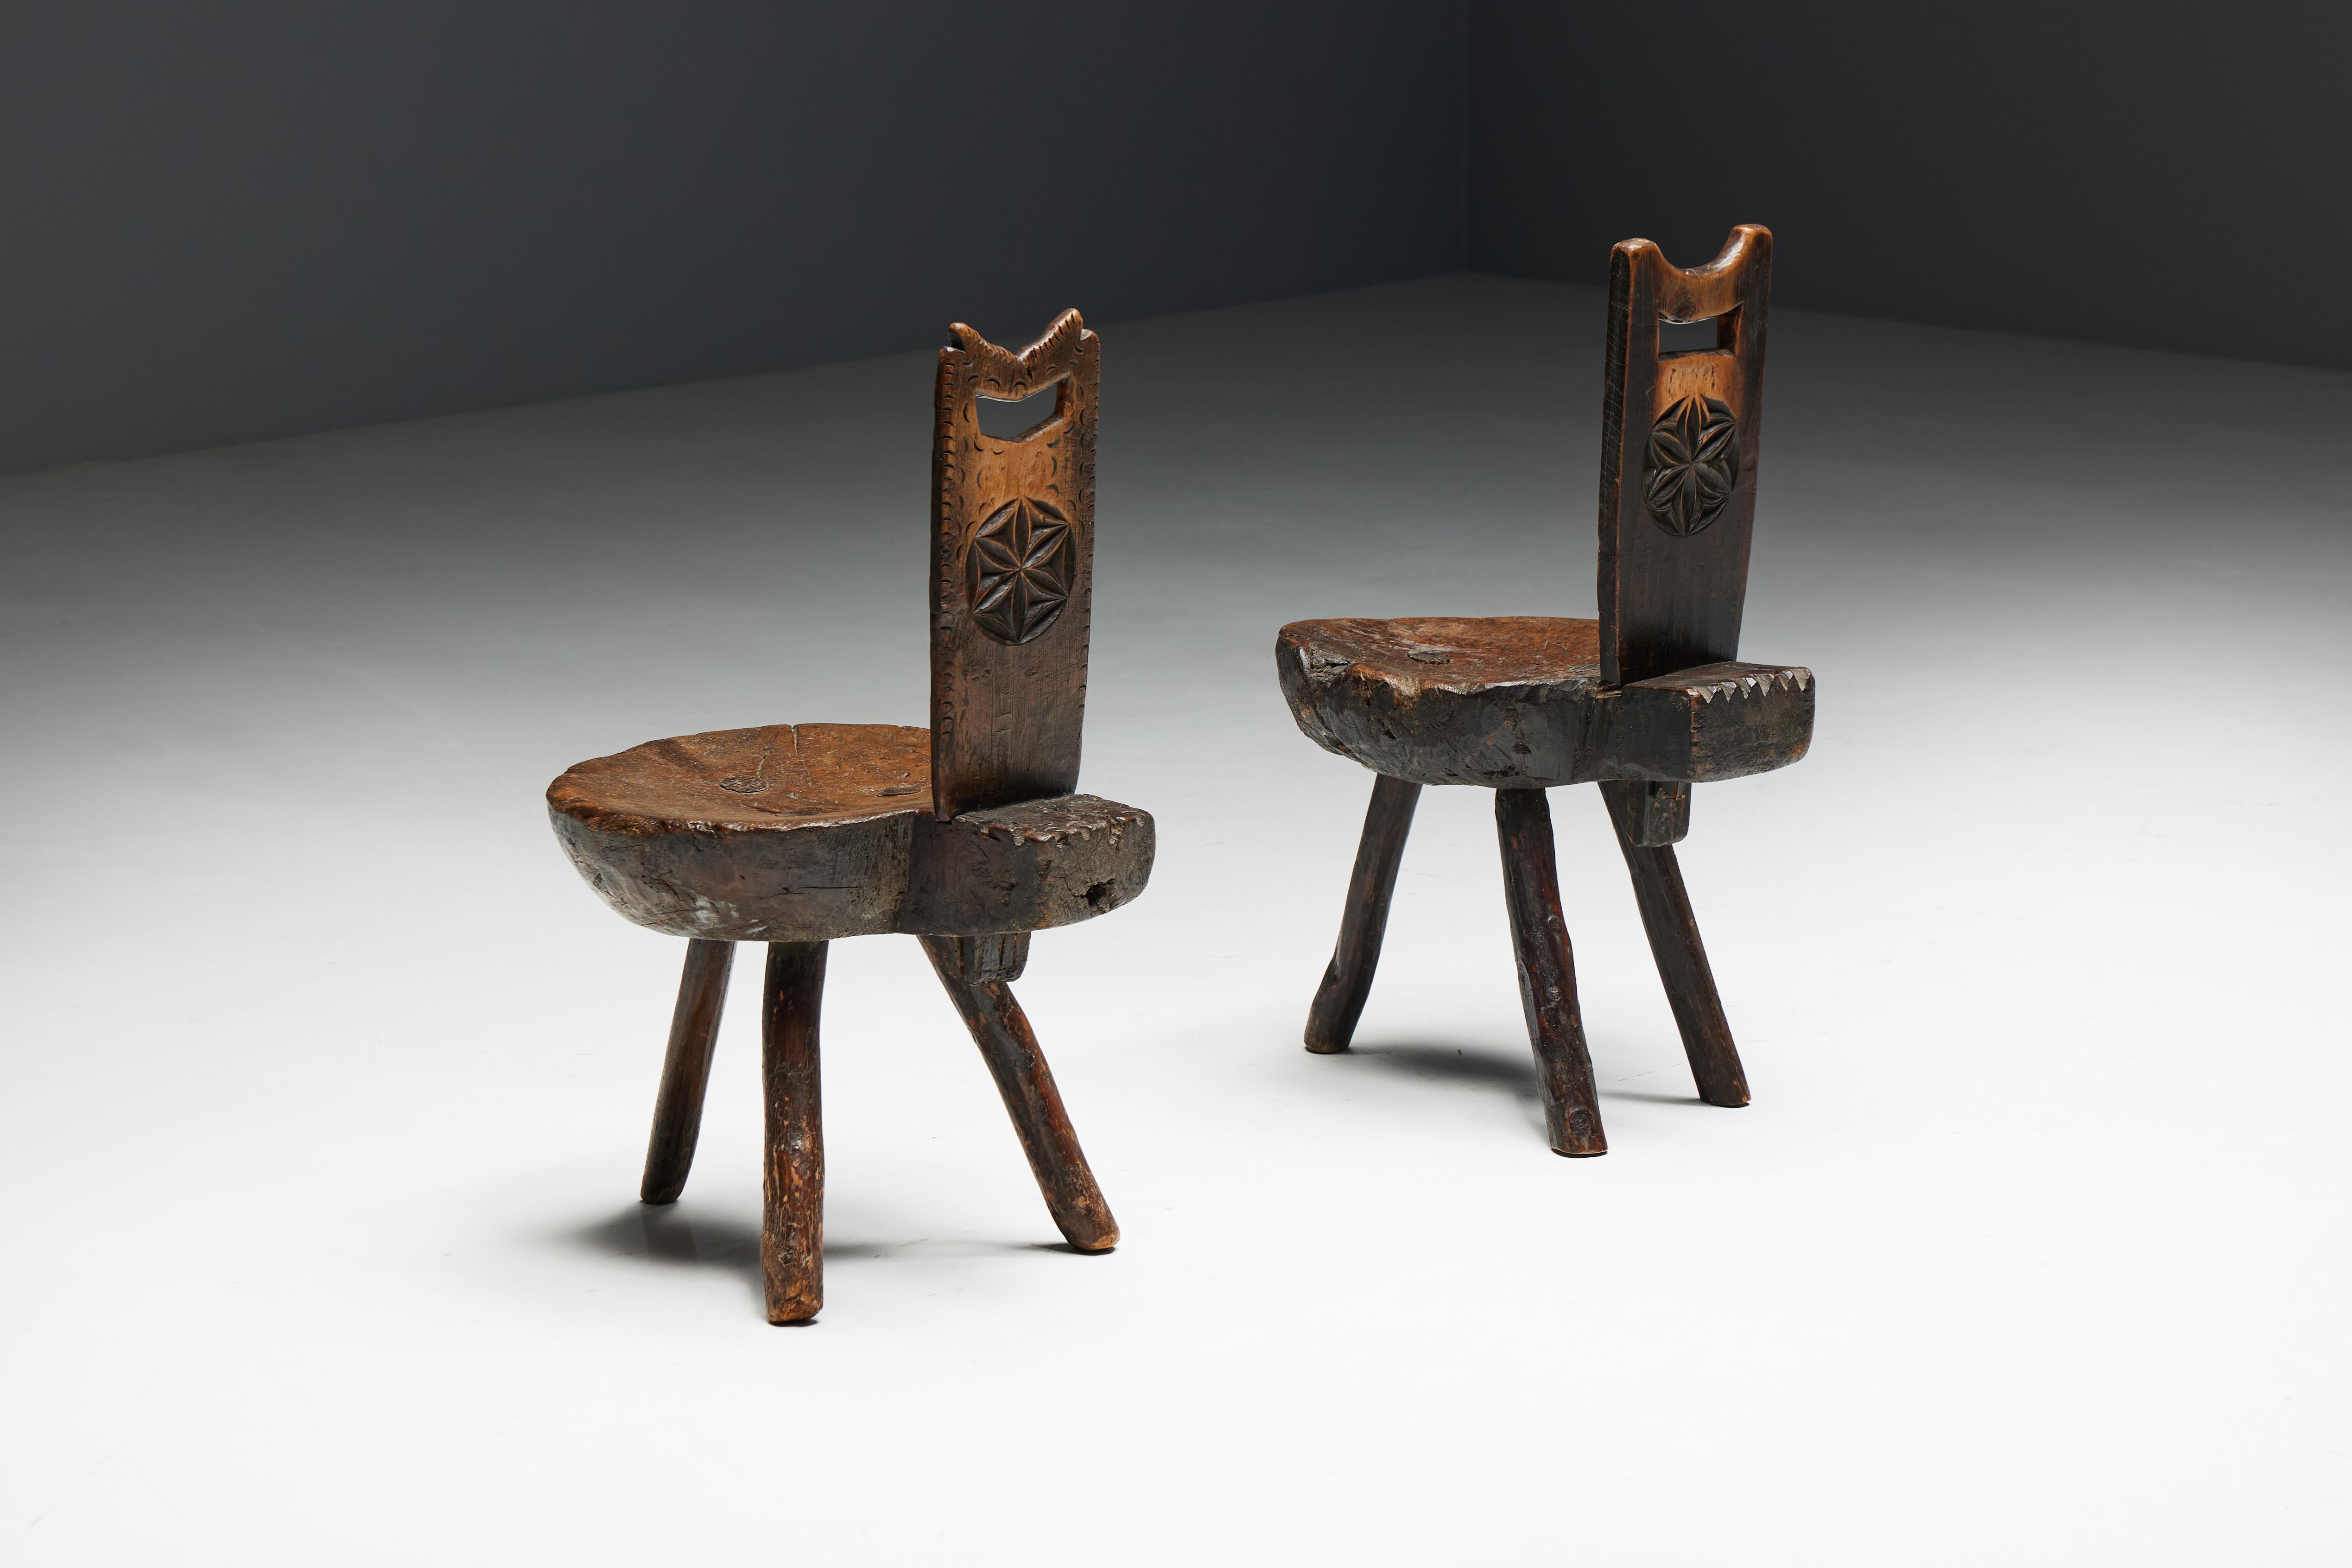 Brutalist alpine chairs, testifying to the raw beauty of the imperfect wabi wabi. Despite their identical origins, each chair has its own unique imperfections, reinforcing their connection to the ethos of finding beauty in impermanence and